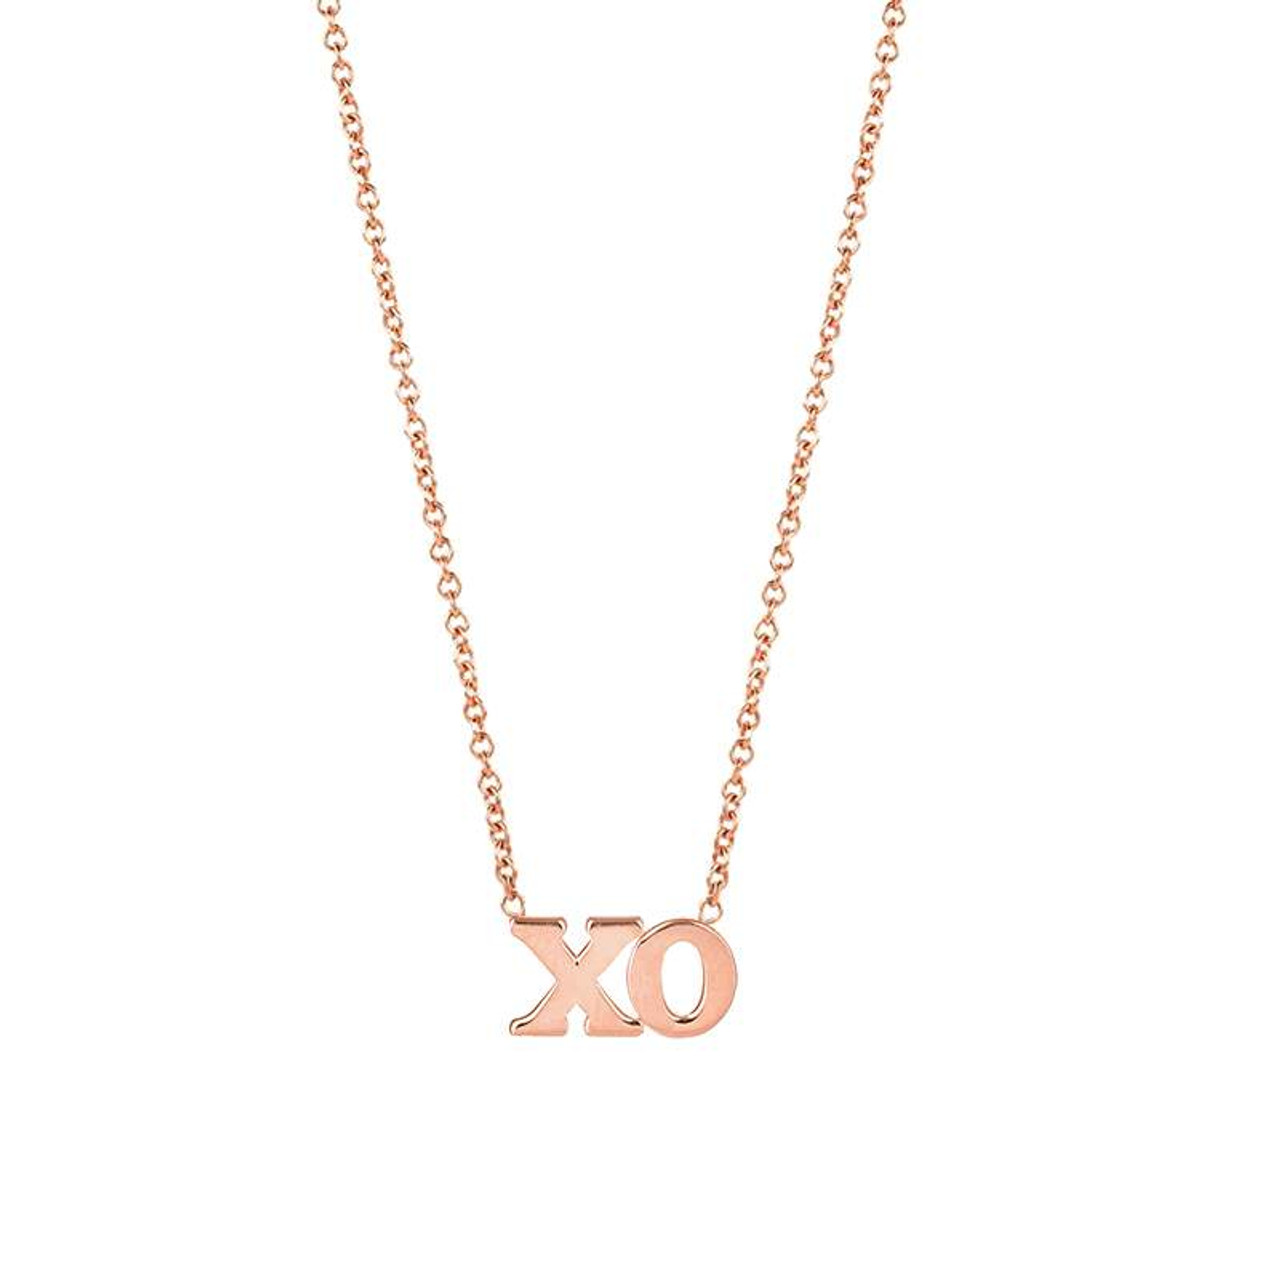 Women's XO Hugs and Kisses Necklace in 14K Real Gold | Why Love